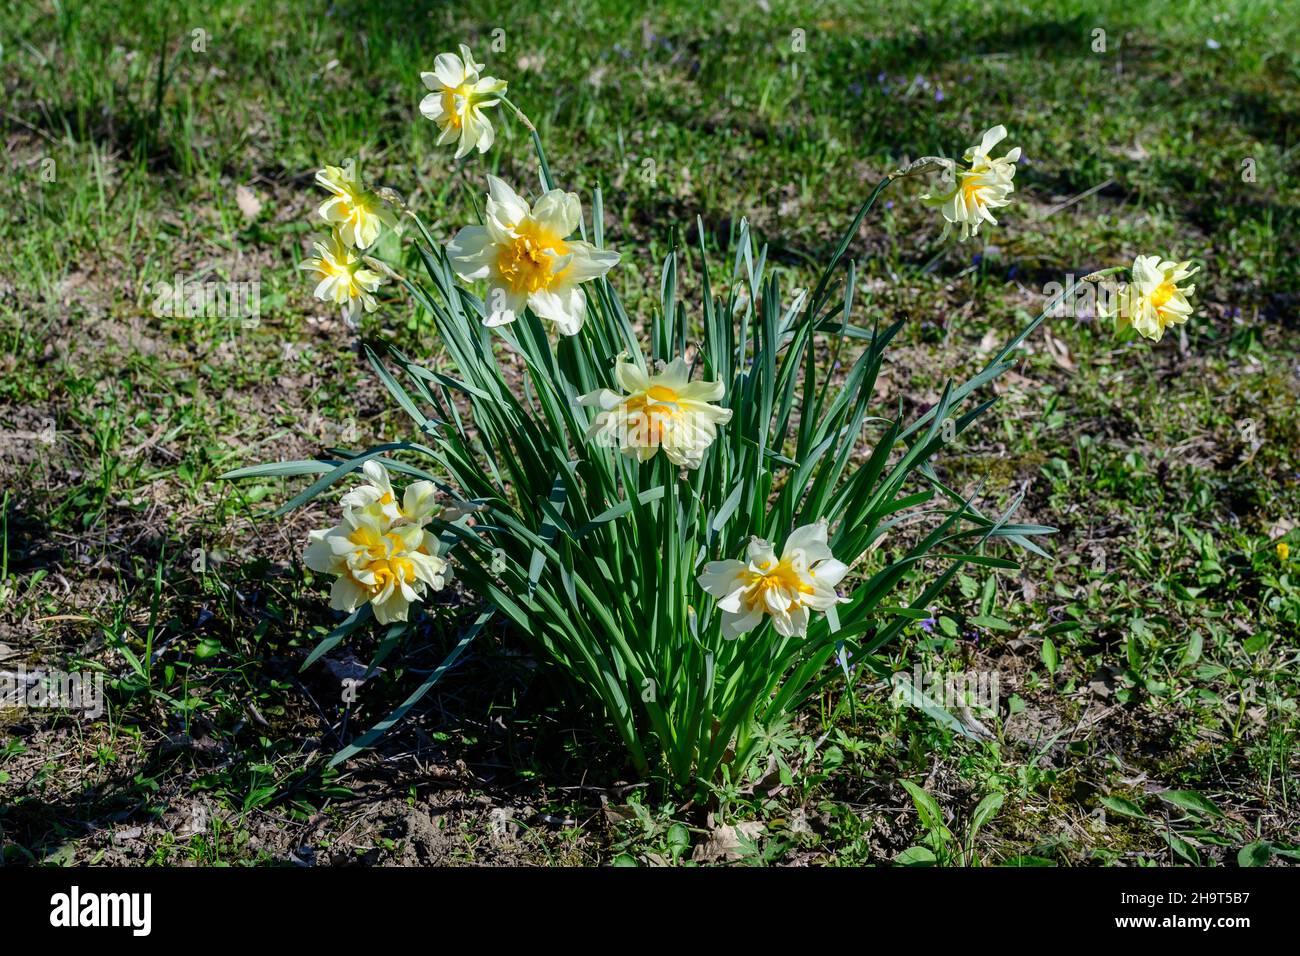 Group of delicate white and vidid yellow daffodil flowers in full bloom with blurred green grass, in a sunny spring garden, beautiful outdoor floral b Stock Photo